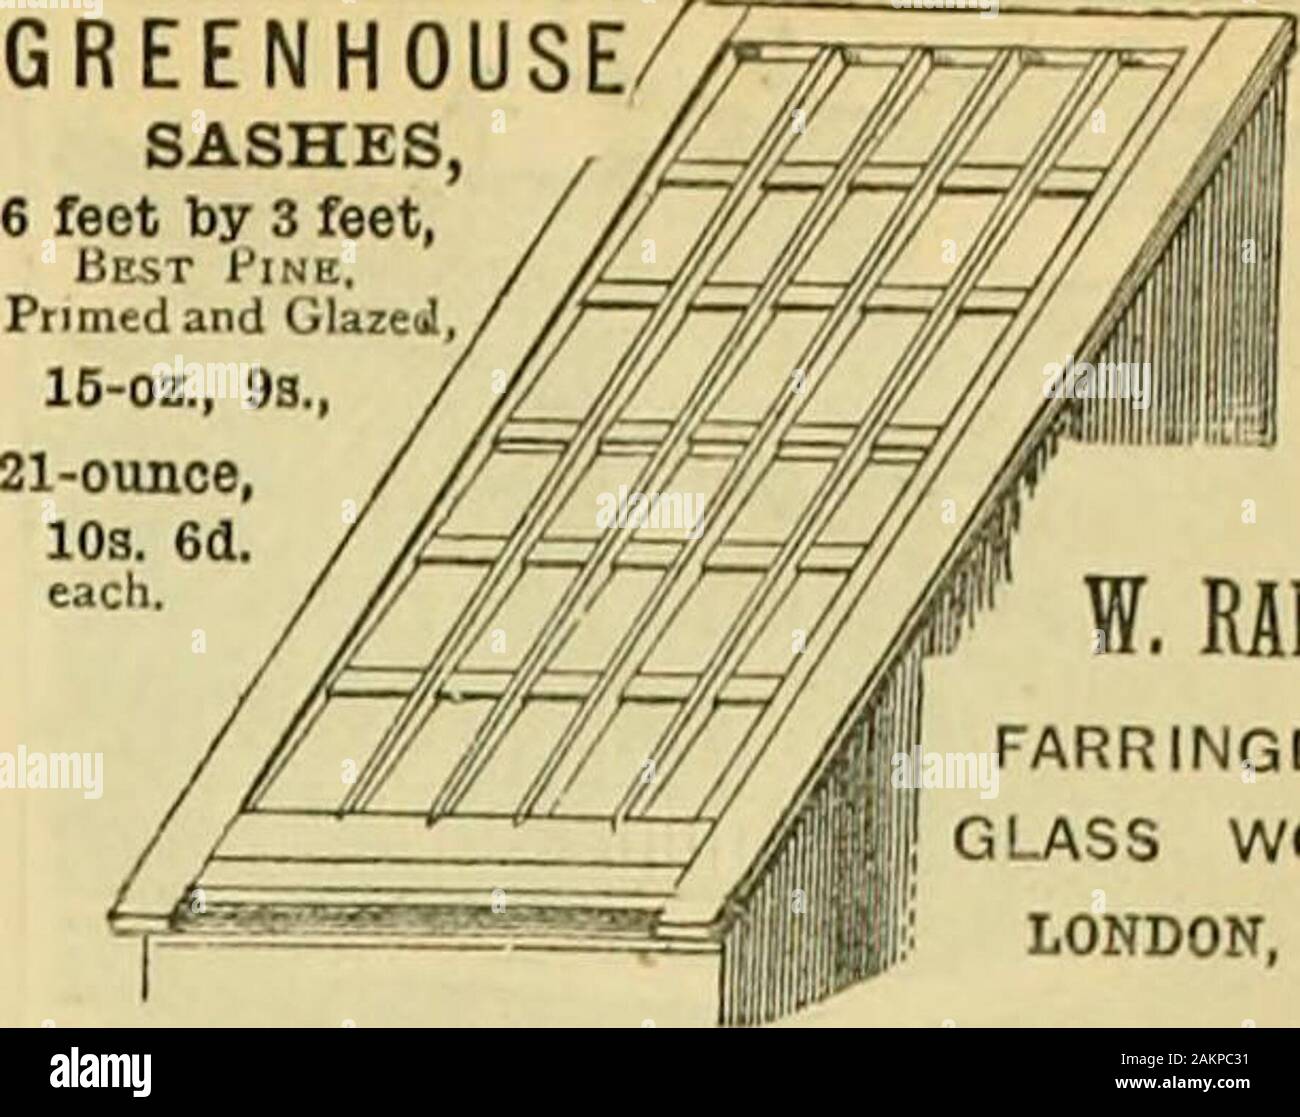 The Gardeners' chronicle : a weekly illustrated journal of horticulture and allied subjects . e of theabove.—I am. sirs, yours faithfully, W. C. COLEMAN. In Bags, 16s. per cwt,; 9s. 64. per ,3 cwt.; 7s. per ., cwt.: 53. per 14 lb. 3S. 63. per 7 lb.; 2s. 43. per 3&lt; lb.; Tin Is. GYDESCOPIA AMAZONAS SANAPOTATO MANURE. SUCCESS. GREAT Every Potato Grower should use Gydes PotatoManure. TESTIMONIAL. * Alioti To7uers Estate, Cluadl^, Stoke-on-Tjent. To Stroud Chemical Manure Companv.—I am pleasedto give you a most favourable report of youi Potato Manure ; itanswered remarkably well here OQ light so Stock Photo